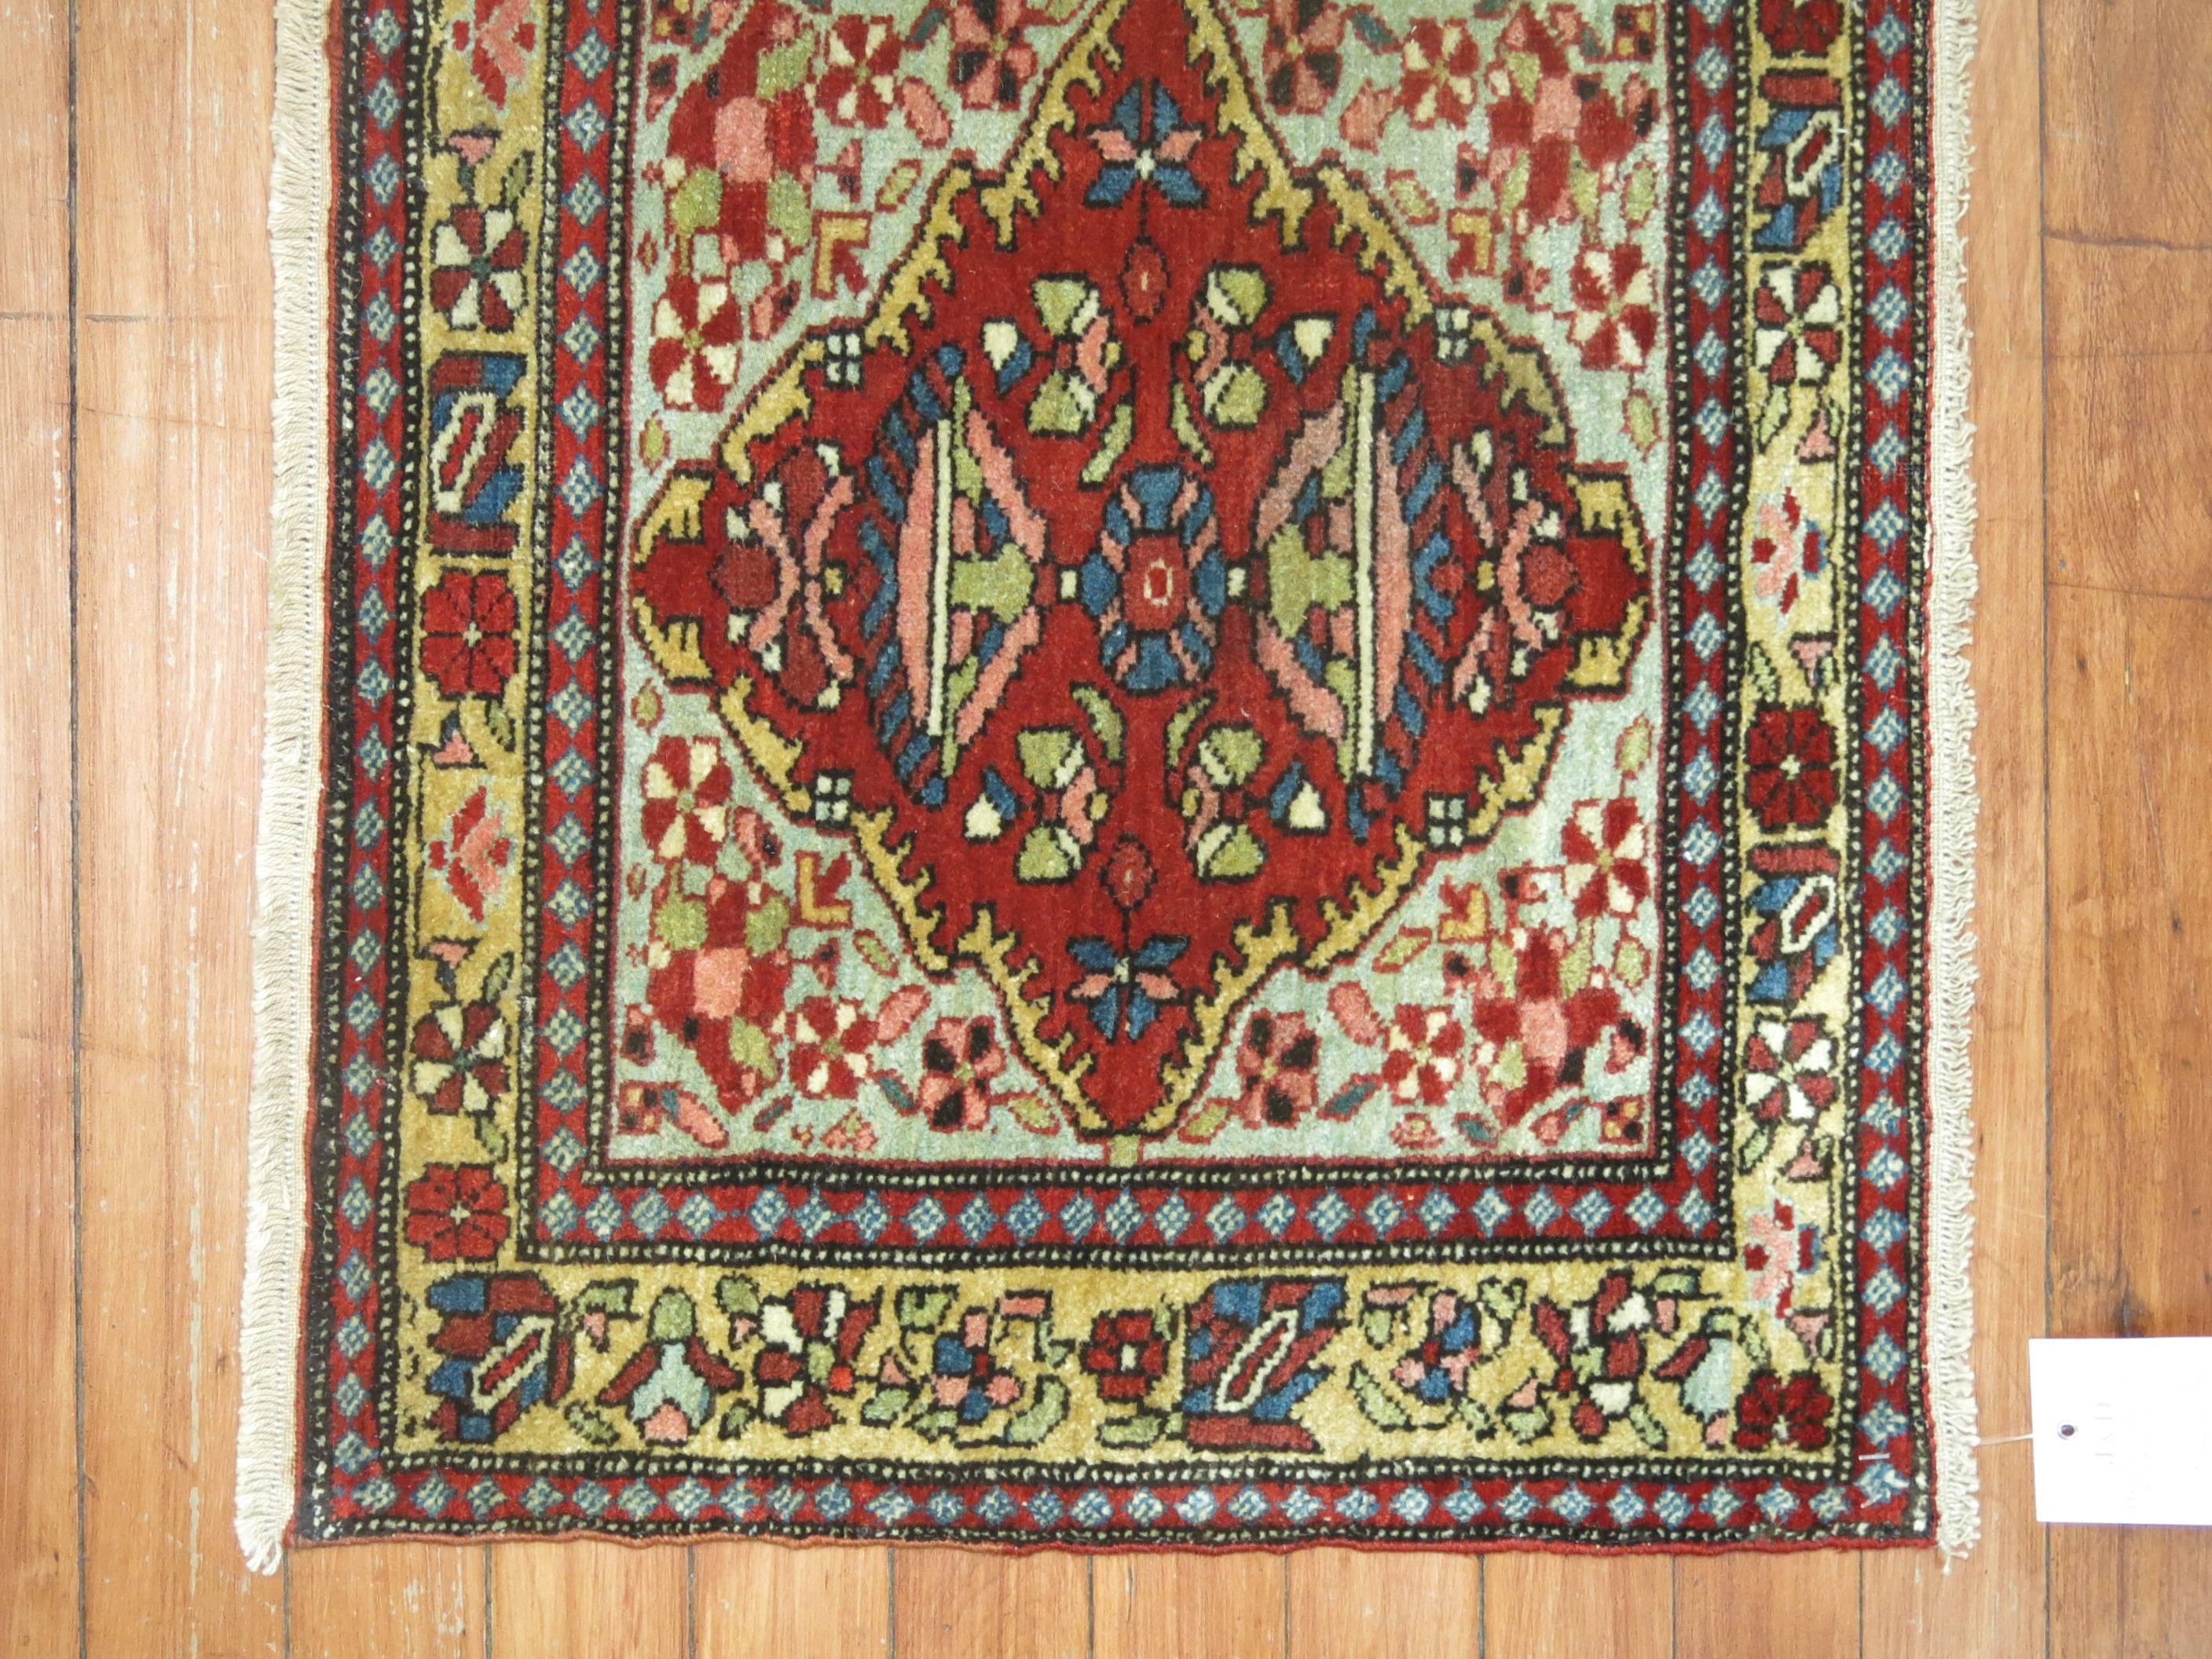 Jewel Tone Fine Quality Antique Persian Malayer Narrow Horizontal Woven Rug In Excellent Condition For Sale In New York, NY